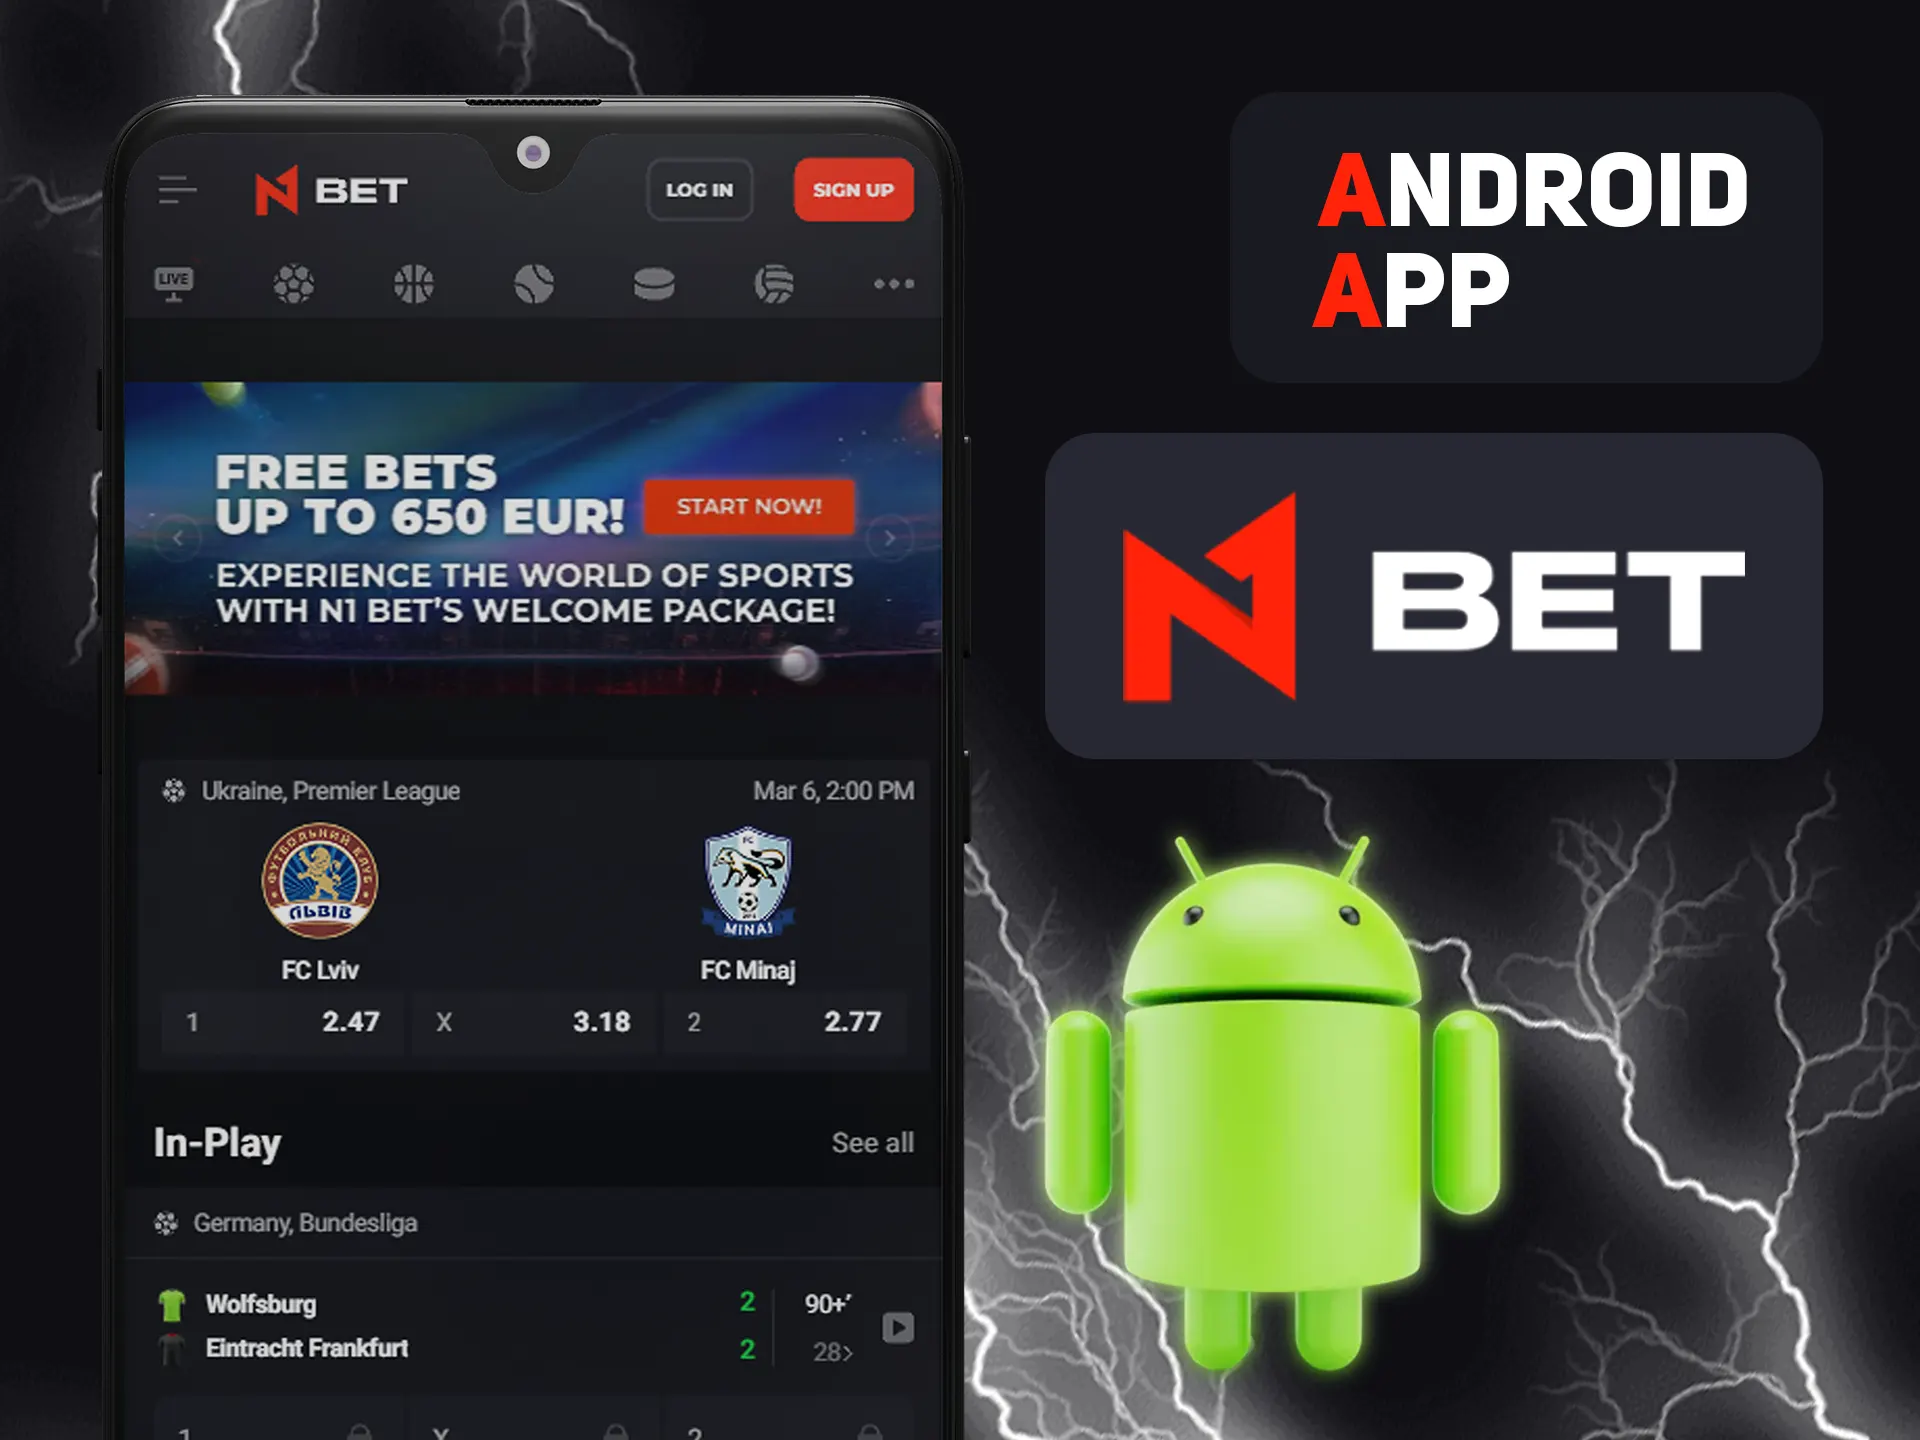 Install N1bet app on your Android device.